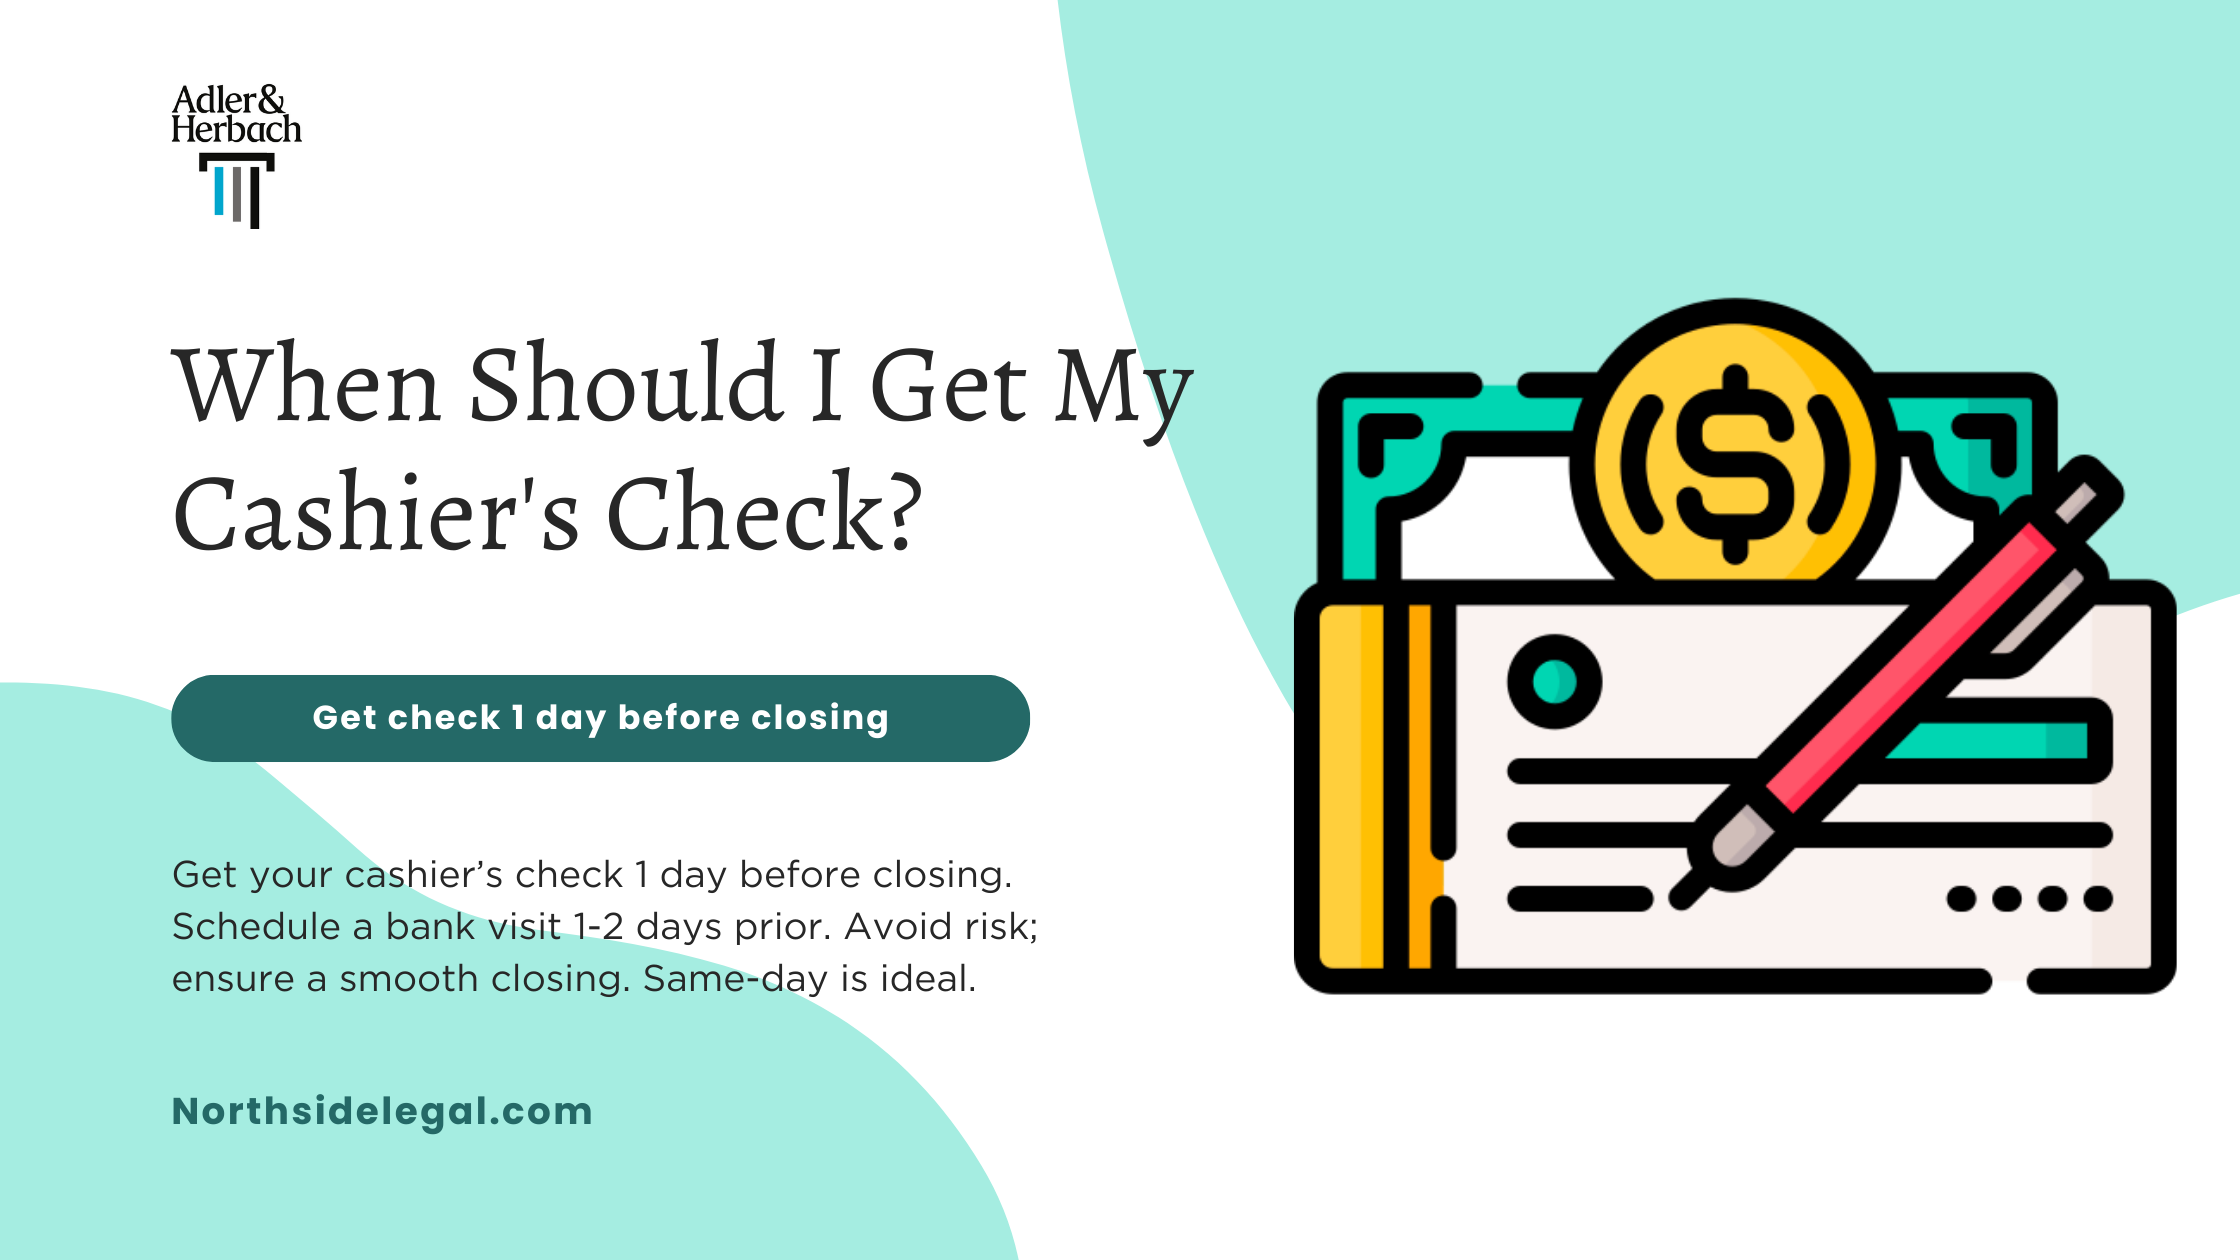 When Should I Get My Cashier’s Check for Closing?